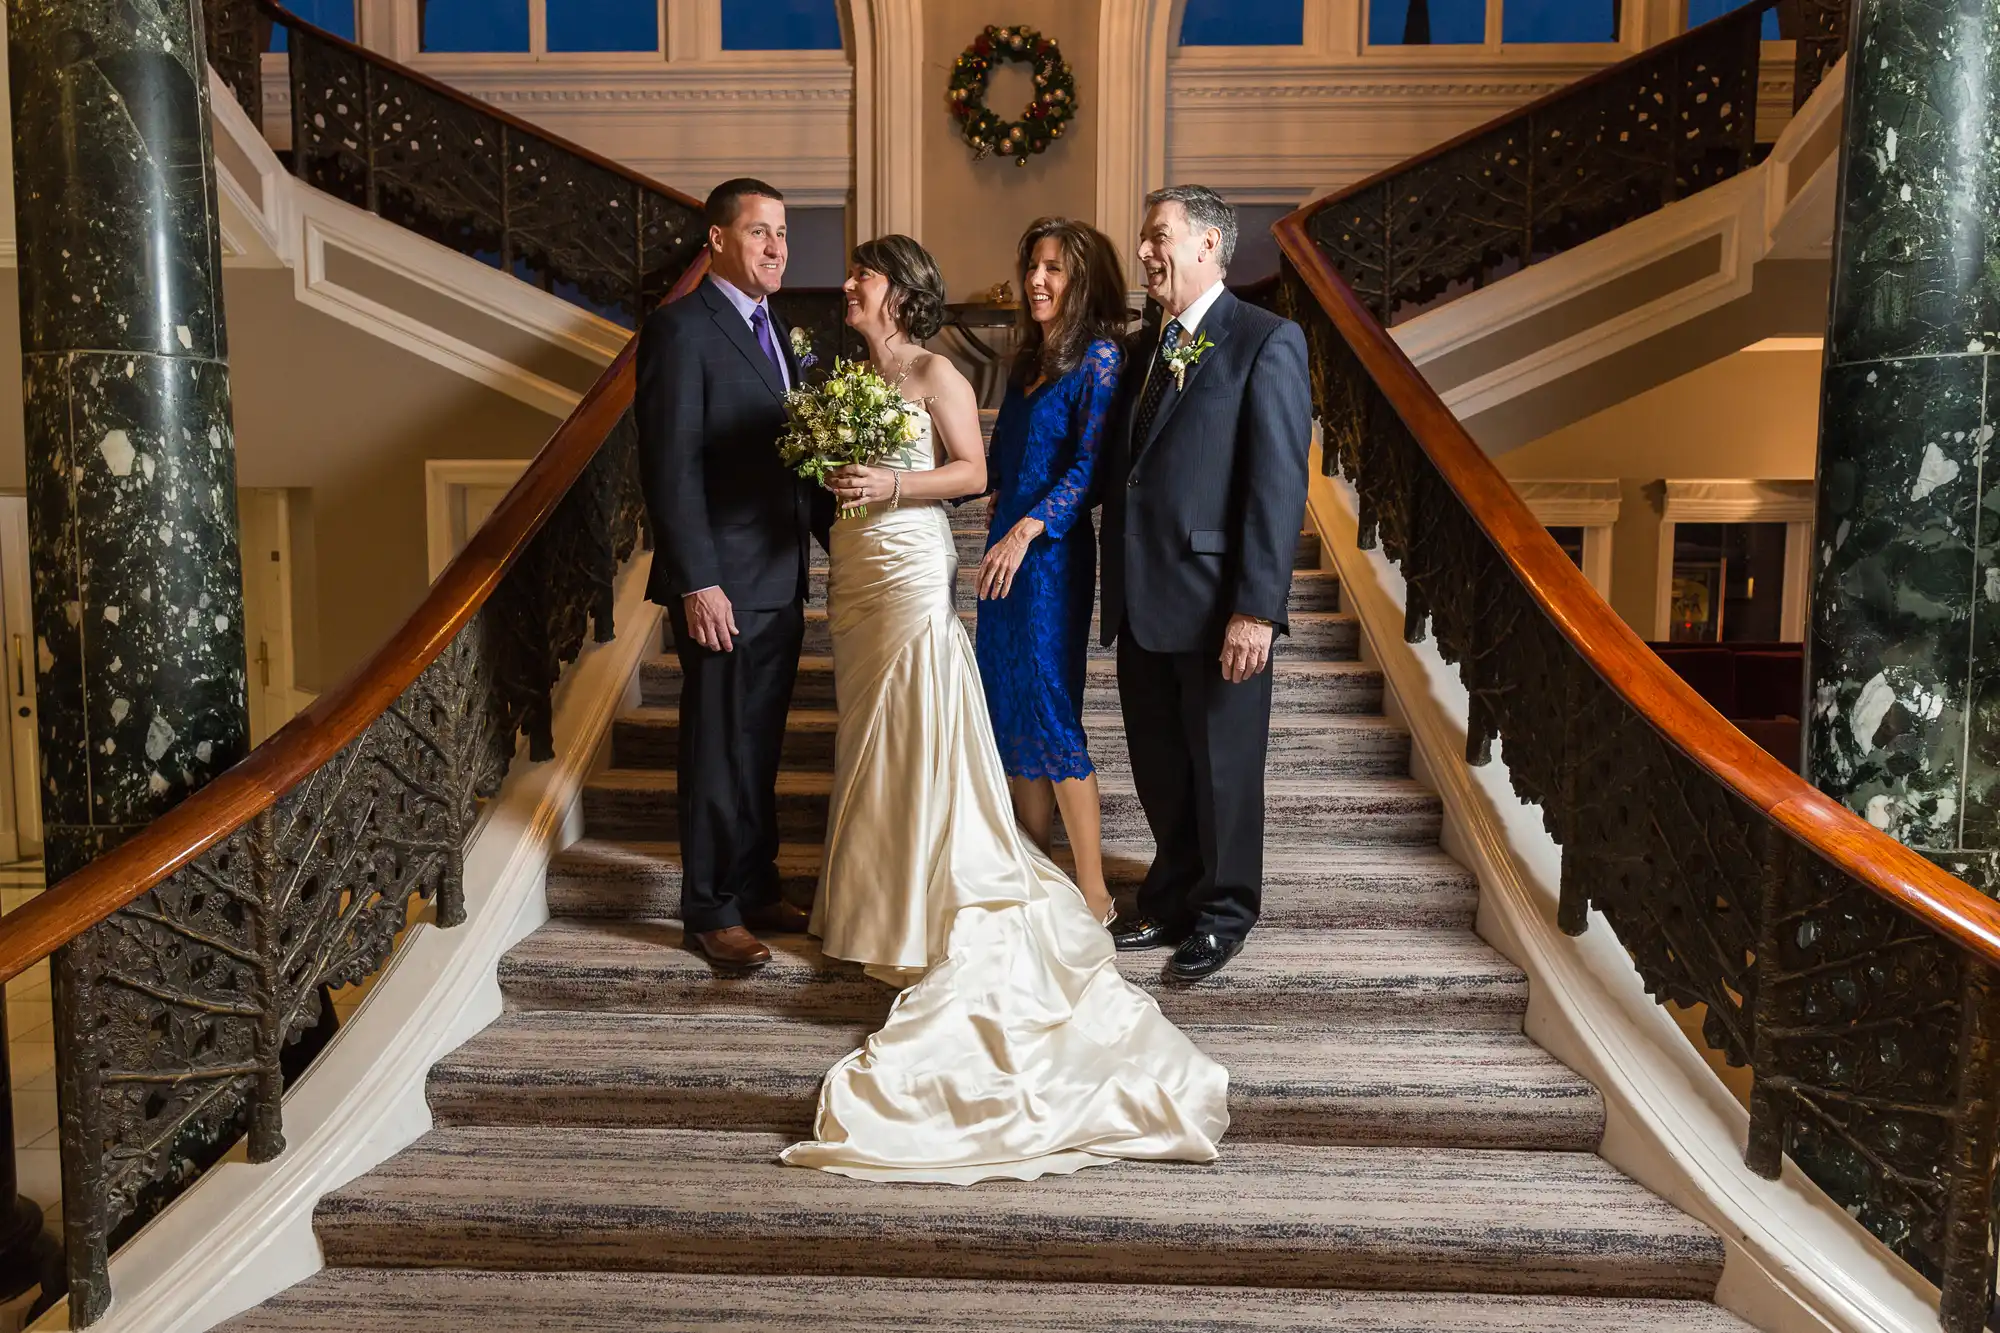 A bride and groom descend a grand staircase with their parents, all smiling and dressed in formal attire.